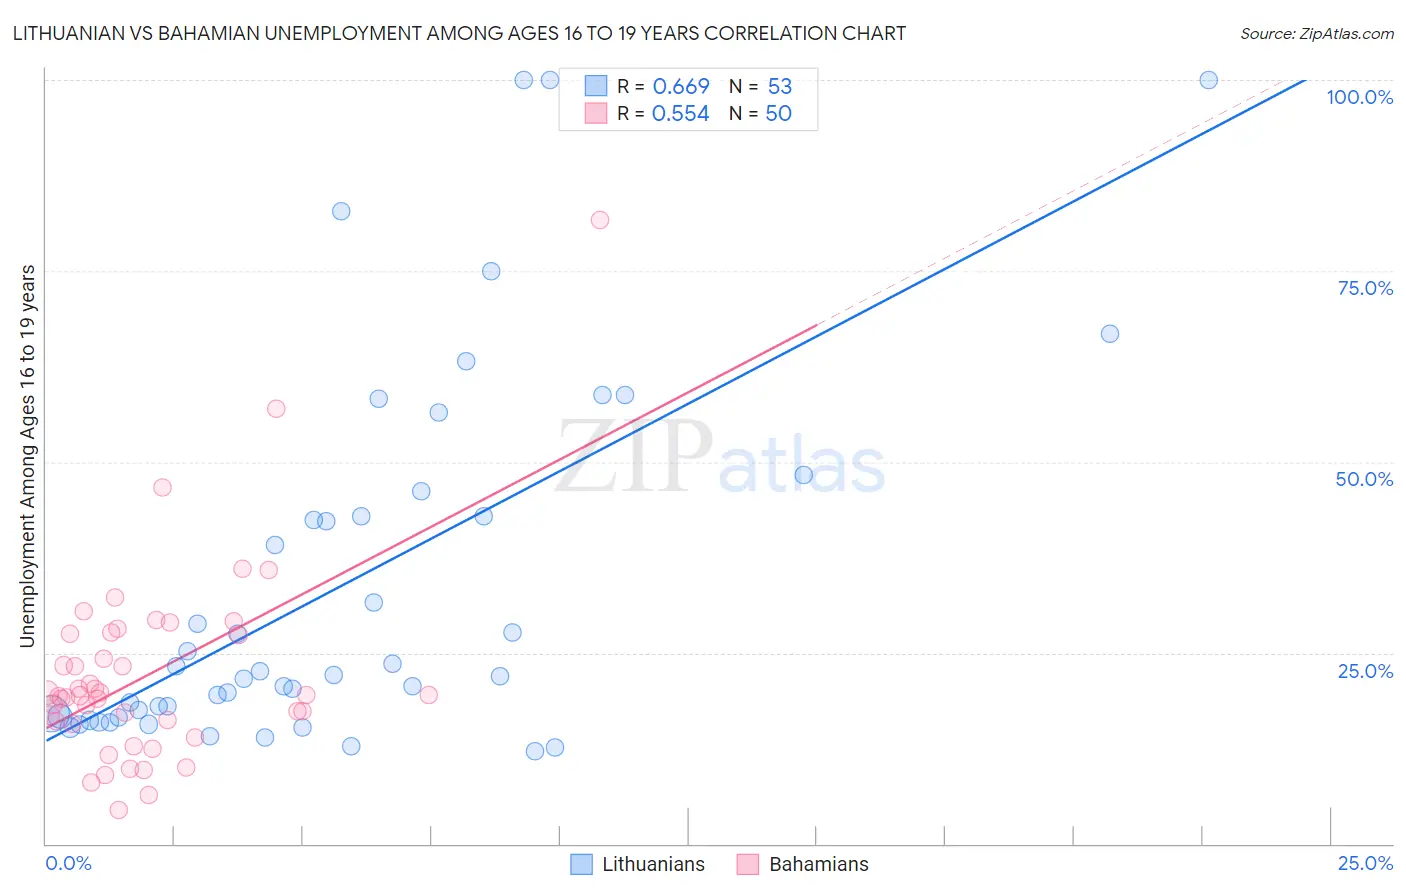 Lithuanian vs Bahamian Unemployment Among Ages 16 to 19 years